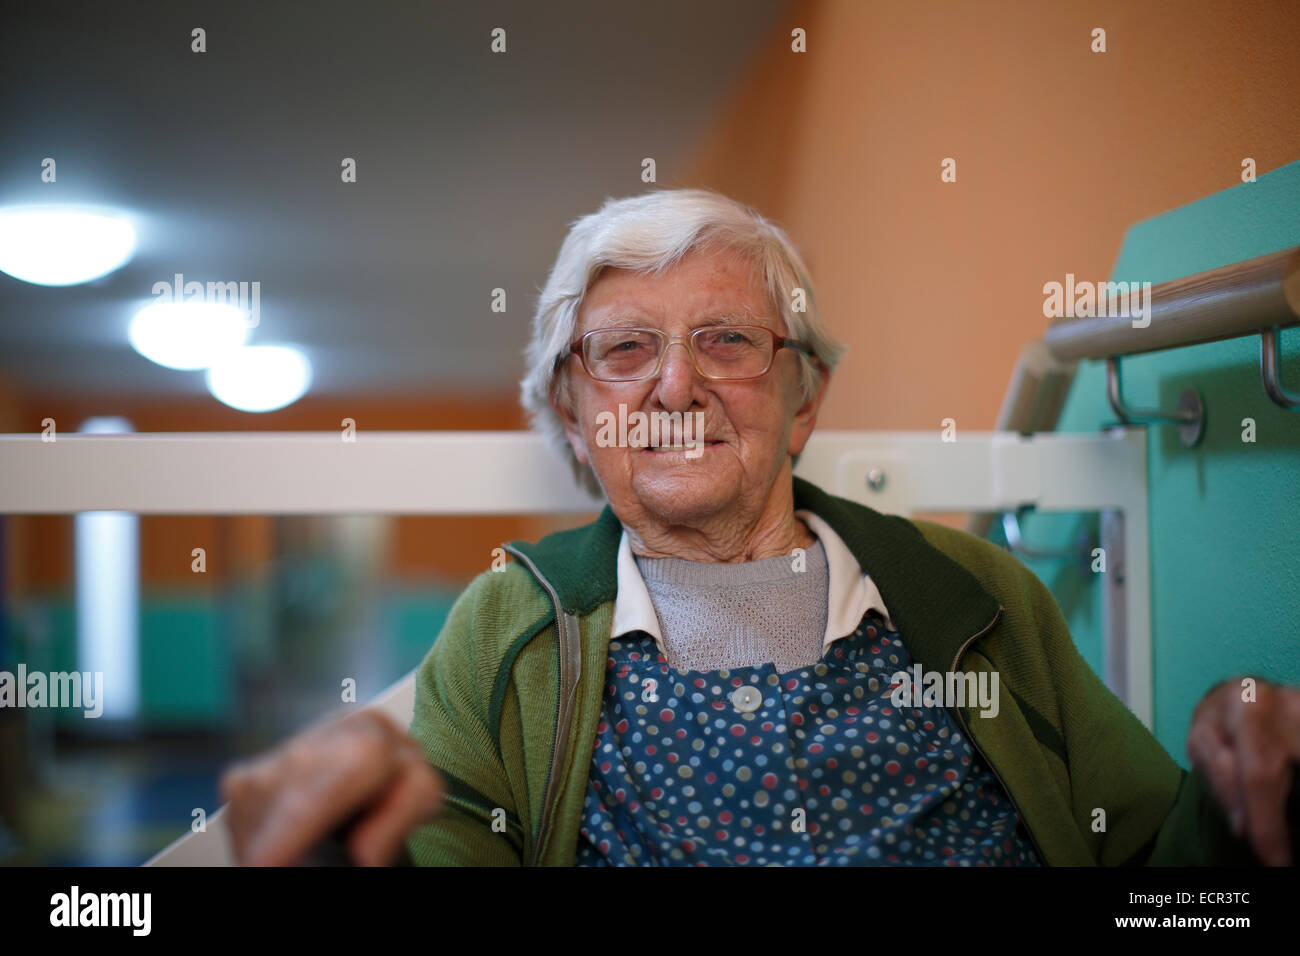 Woman 89 years old, nursing home, portrait Stock Photo